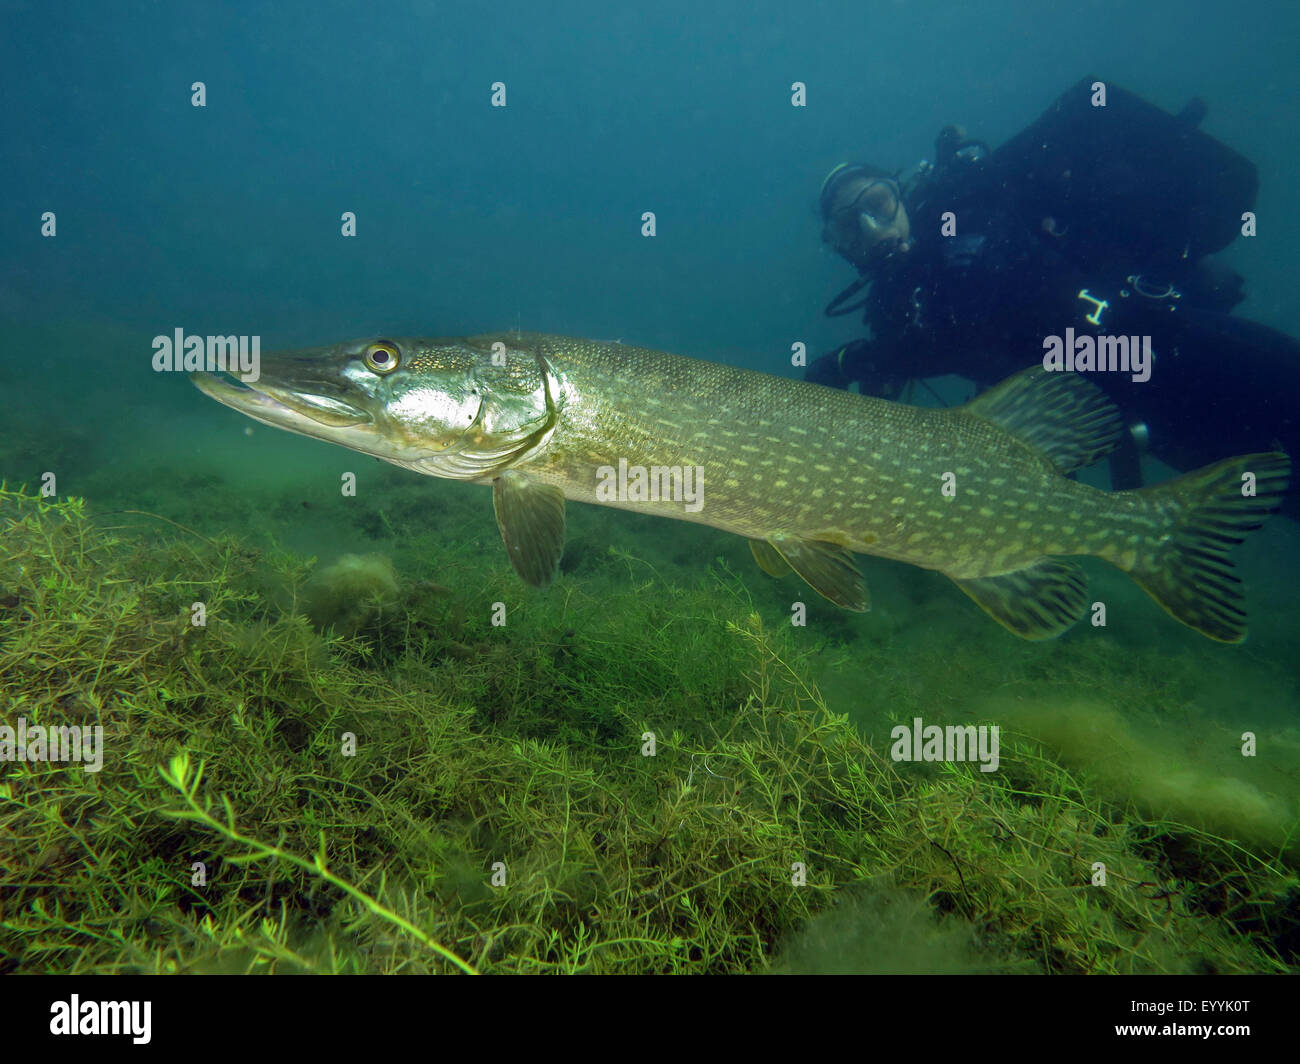 pike, northern pike (Esox lucius), diver watching a pike in a lake, Germany, North Rhine-Westphalia, Fuehlinger See Stock Photo